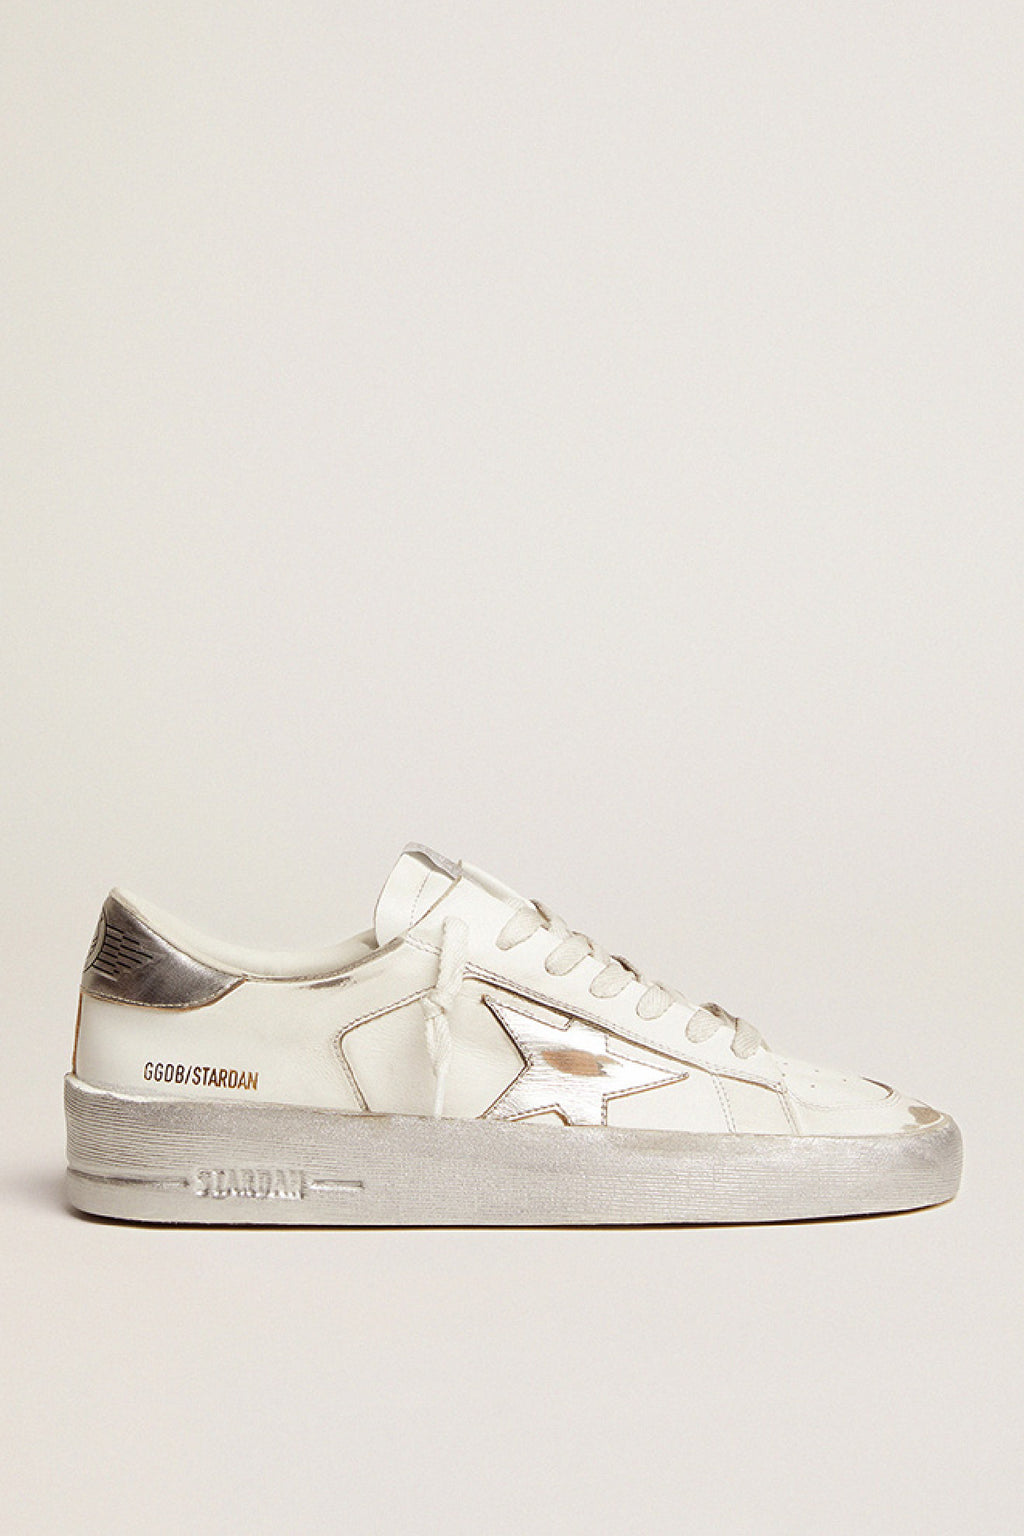 Golden Goose Stardan Leather Sneaker w. Laminated Star and Heel